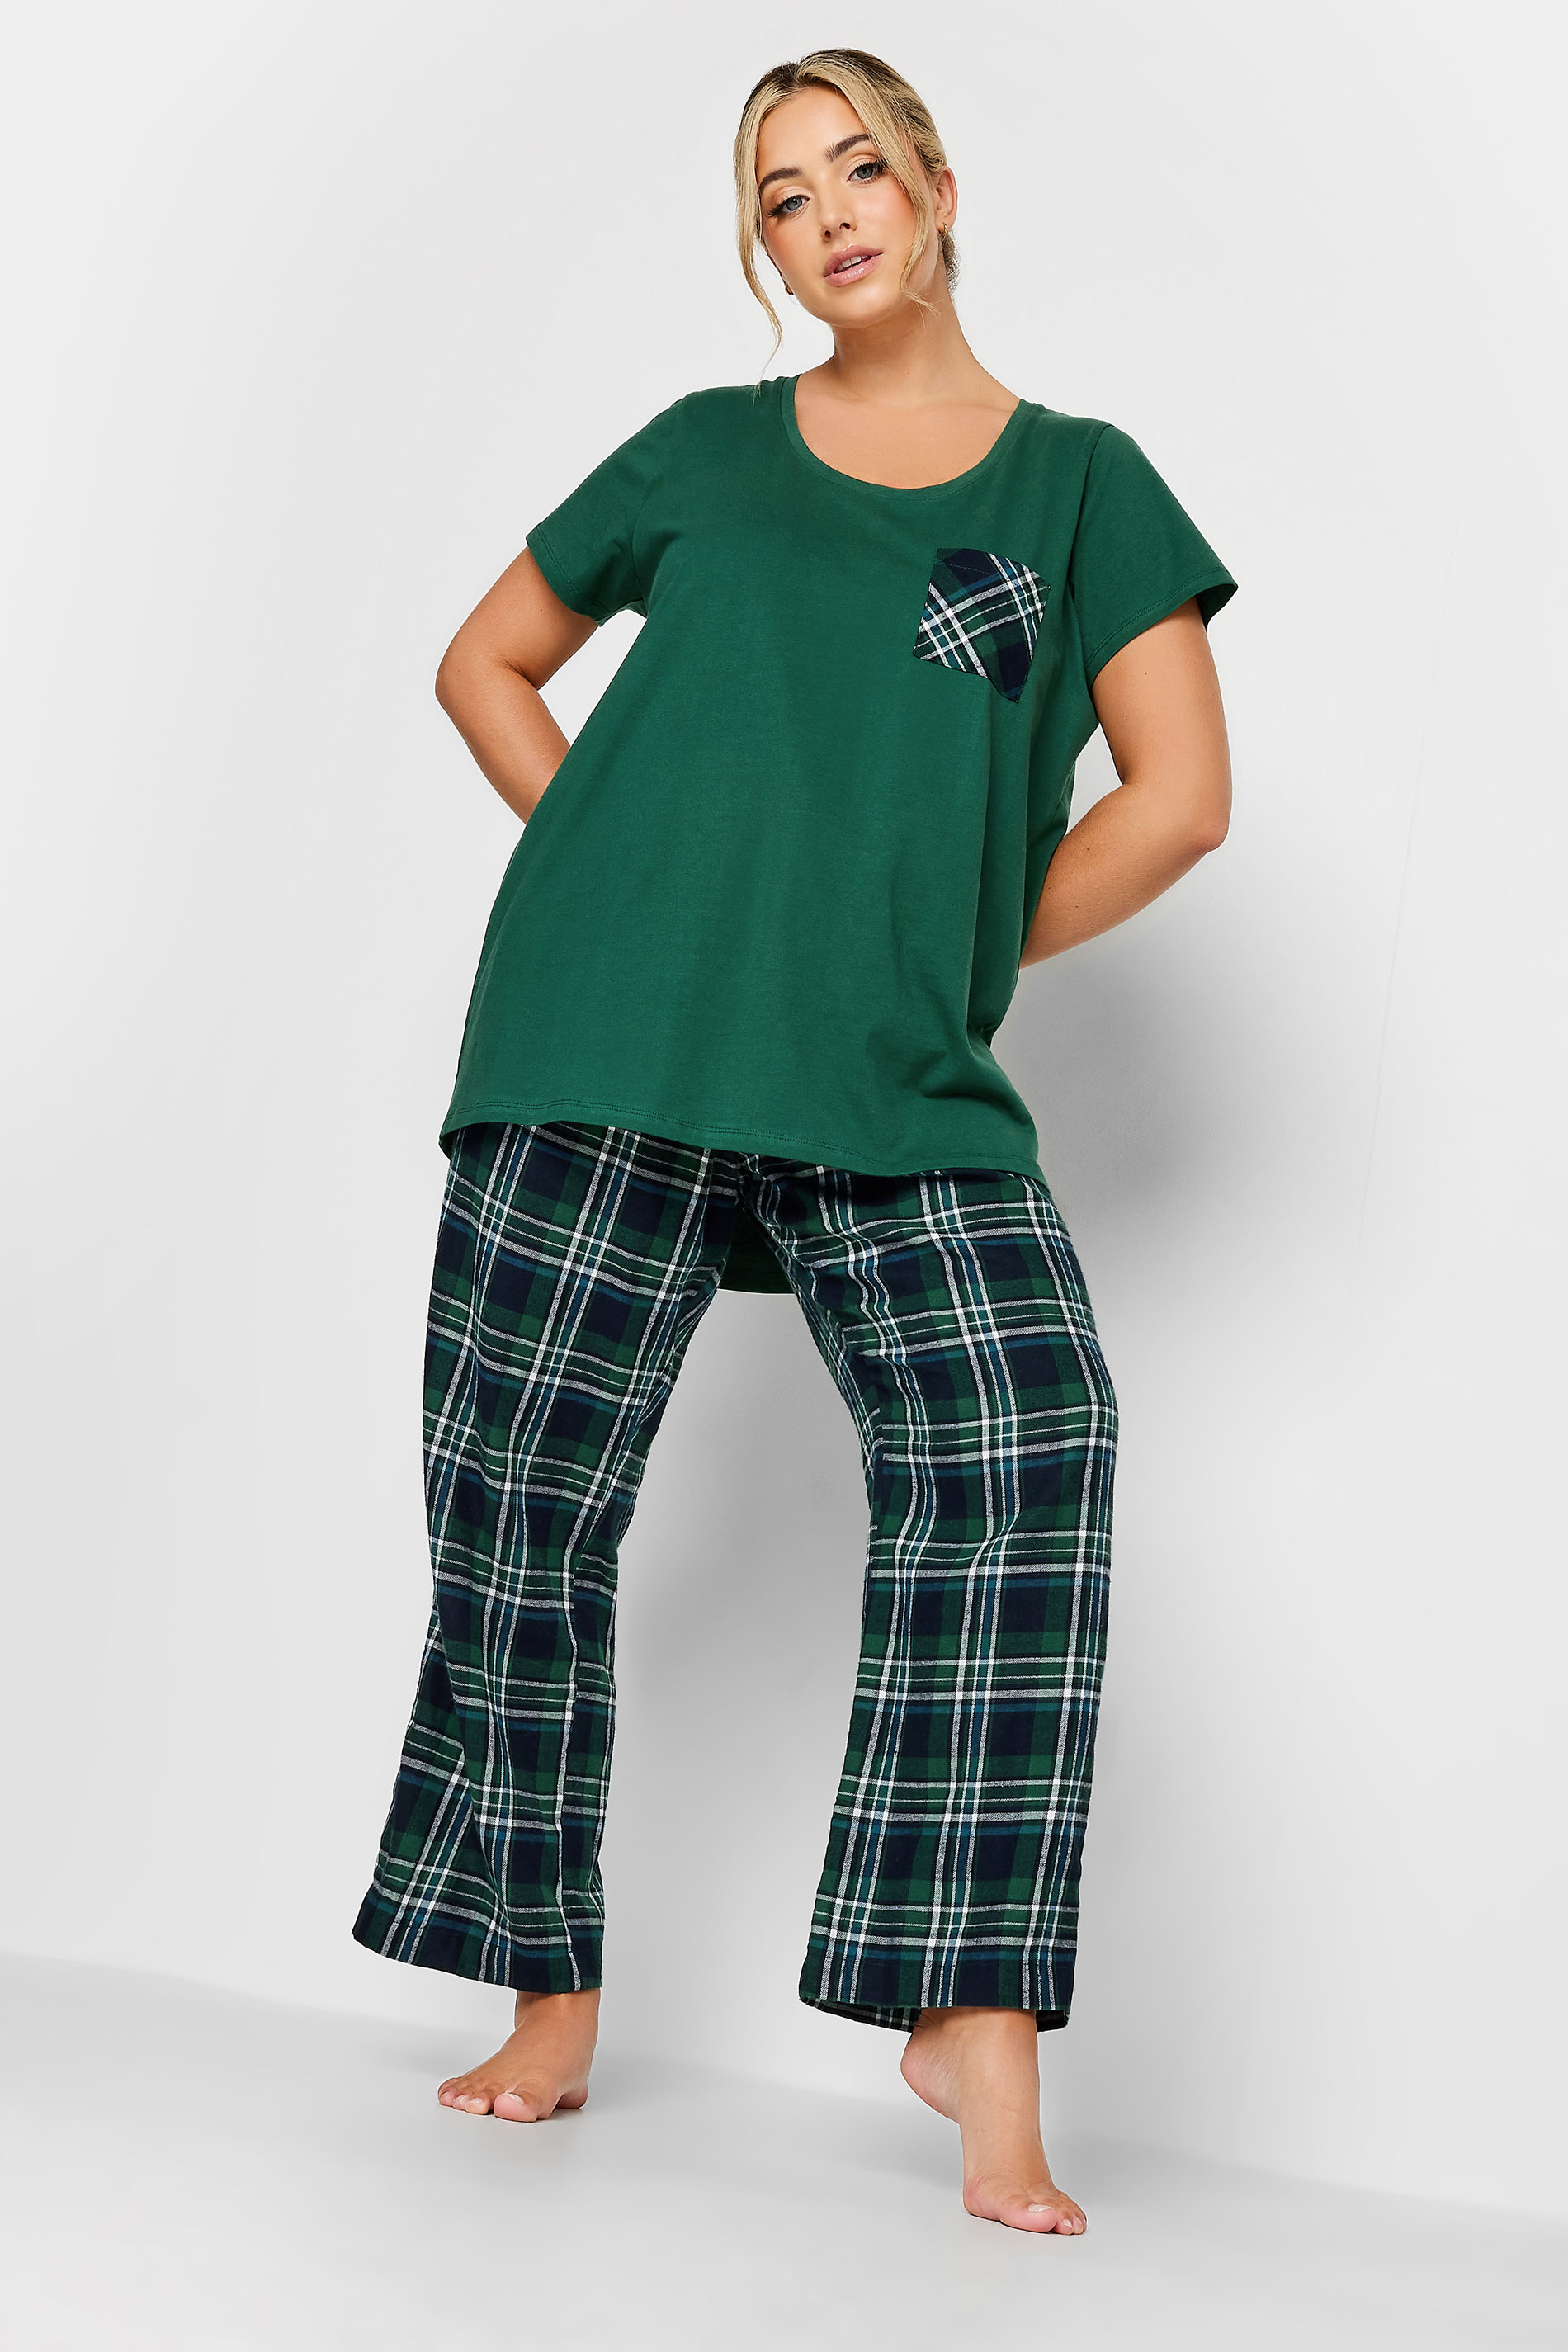 LIMITED COLLECTION Plus Size Green Tartan Check Pocket Pyjama Top | Yours Clothing 3